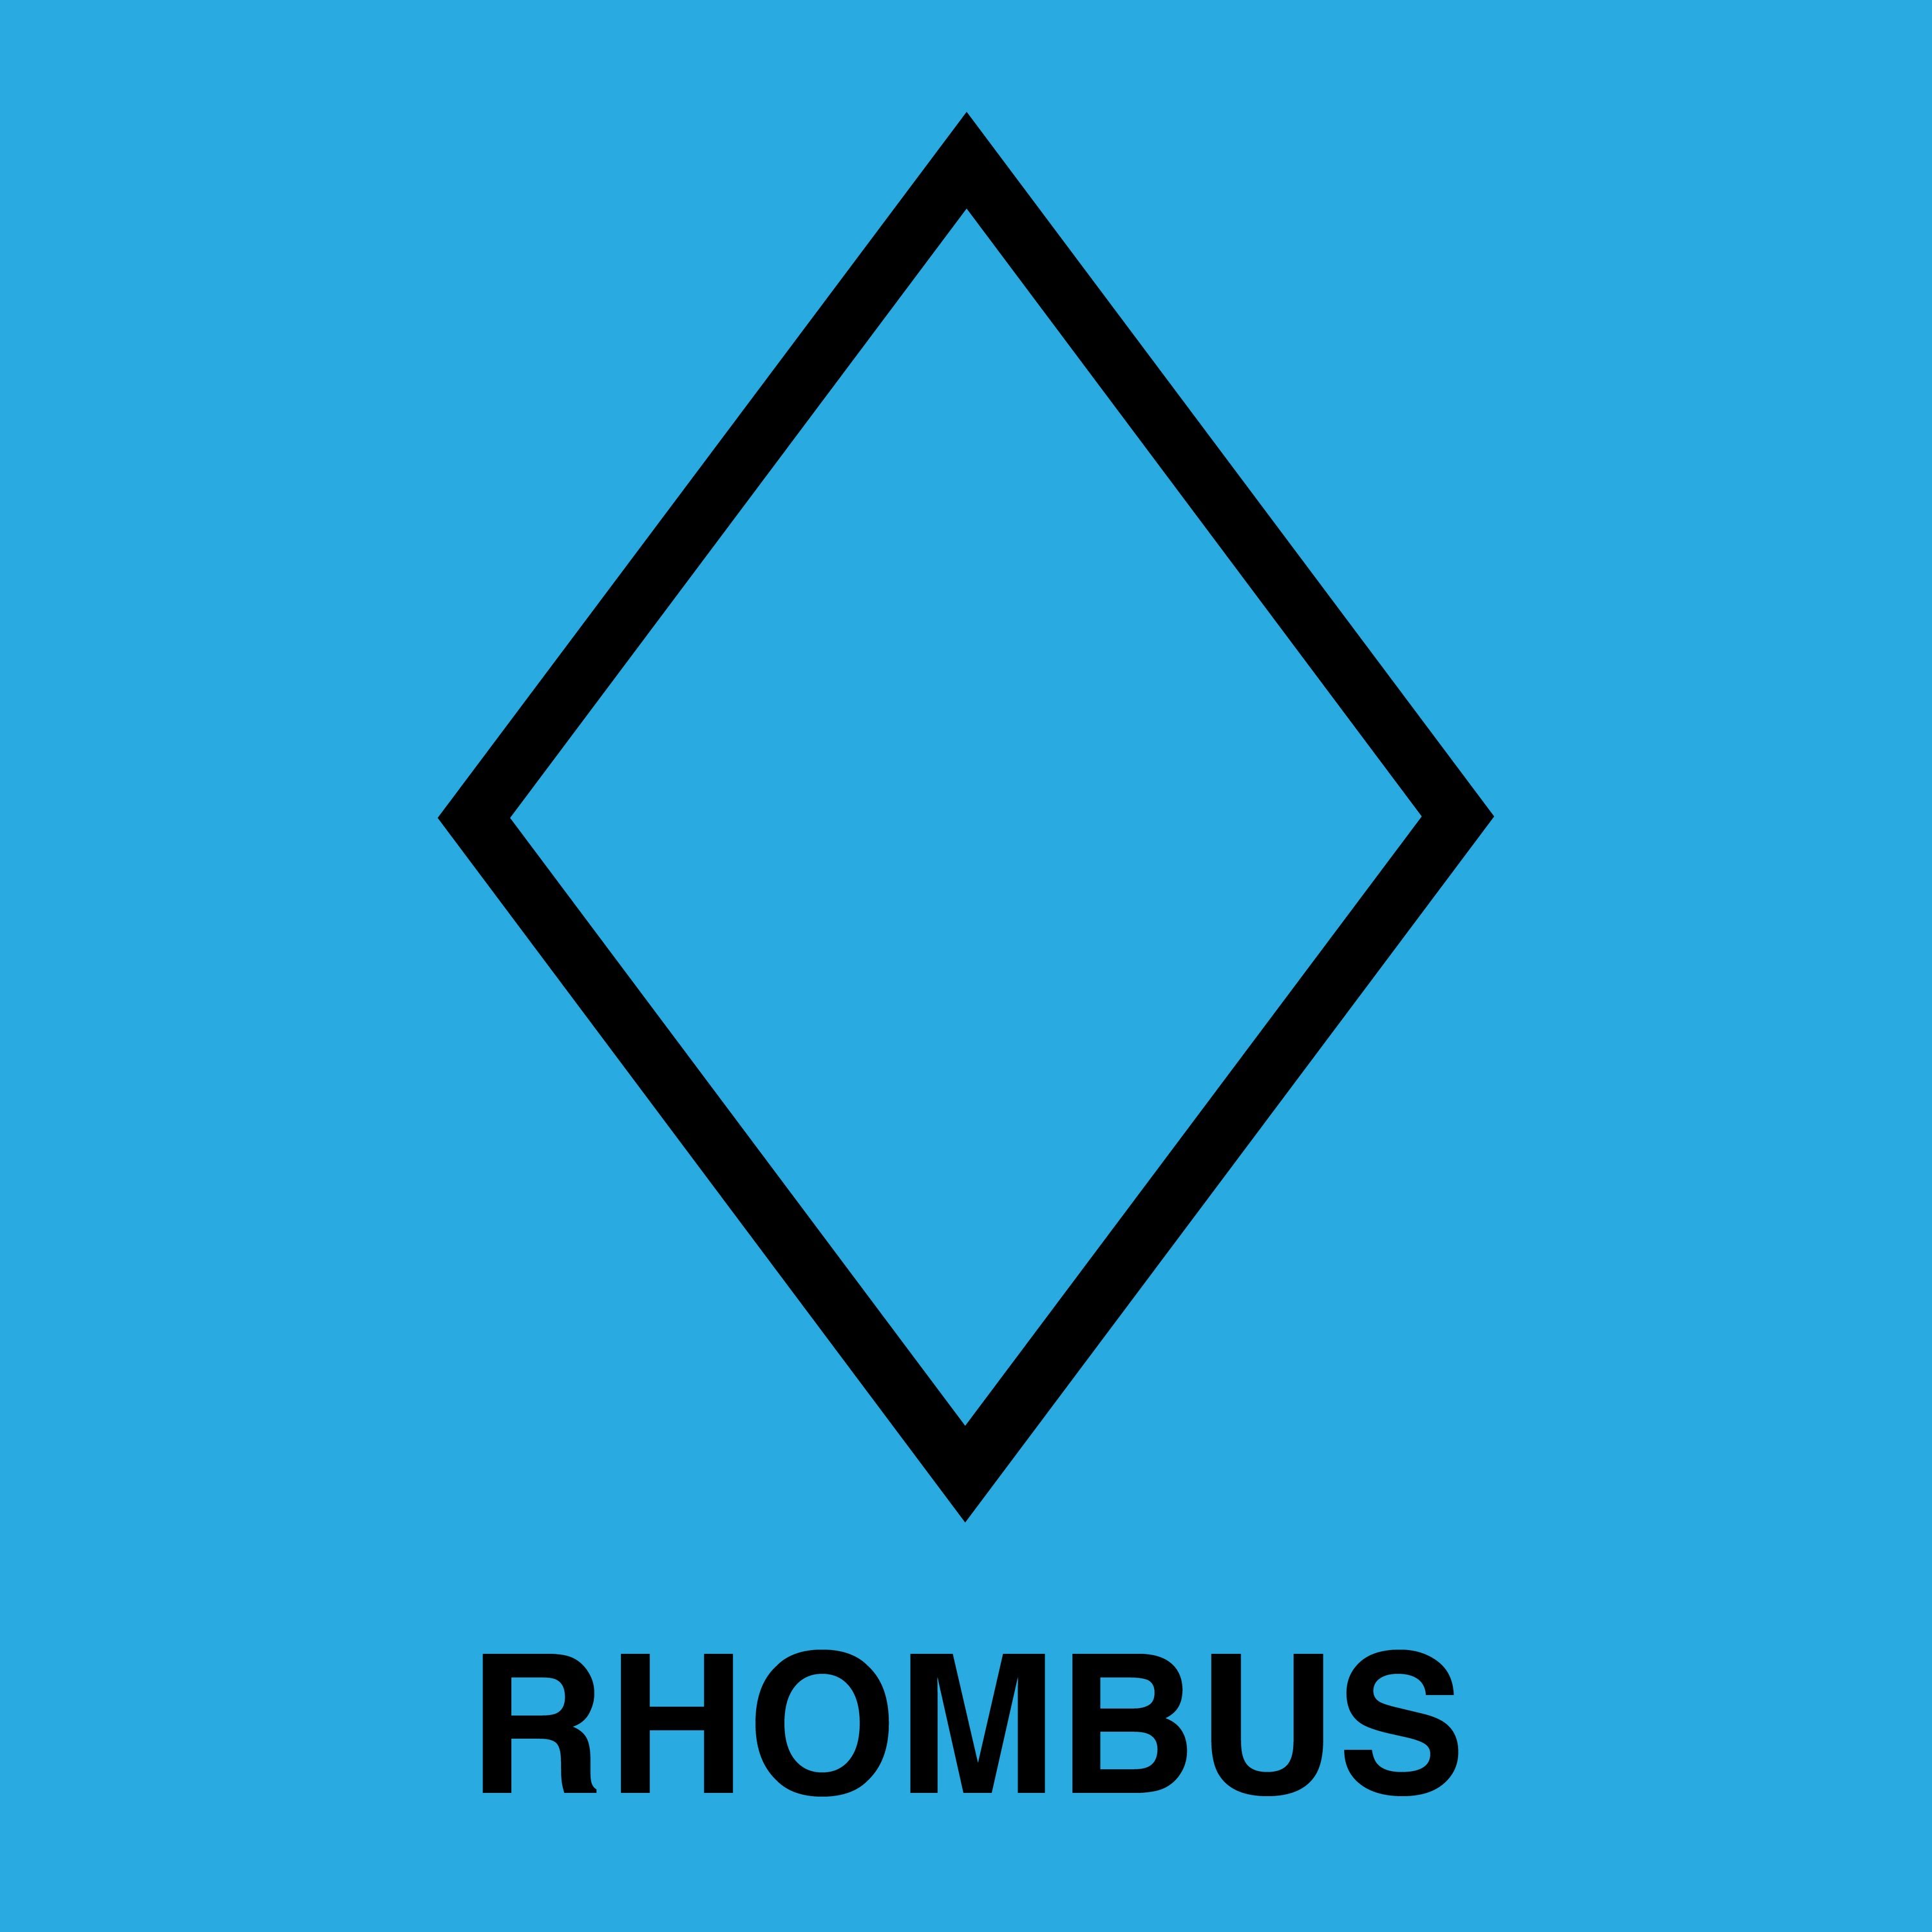 What is a nonsquare rhombus? Socratic